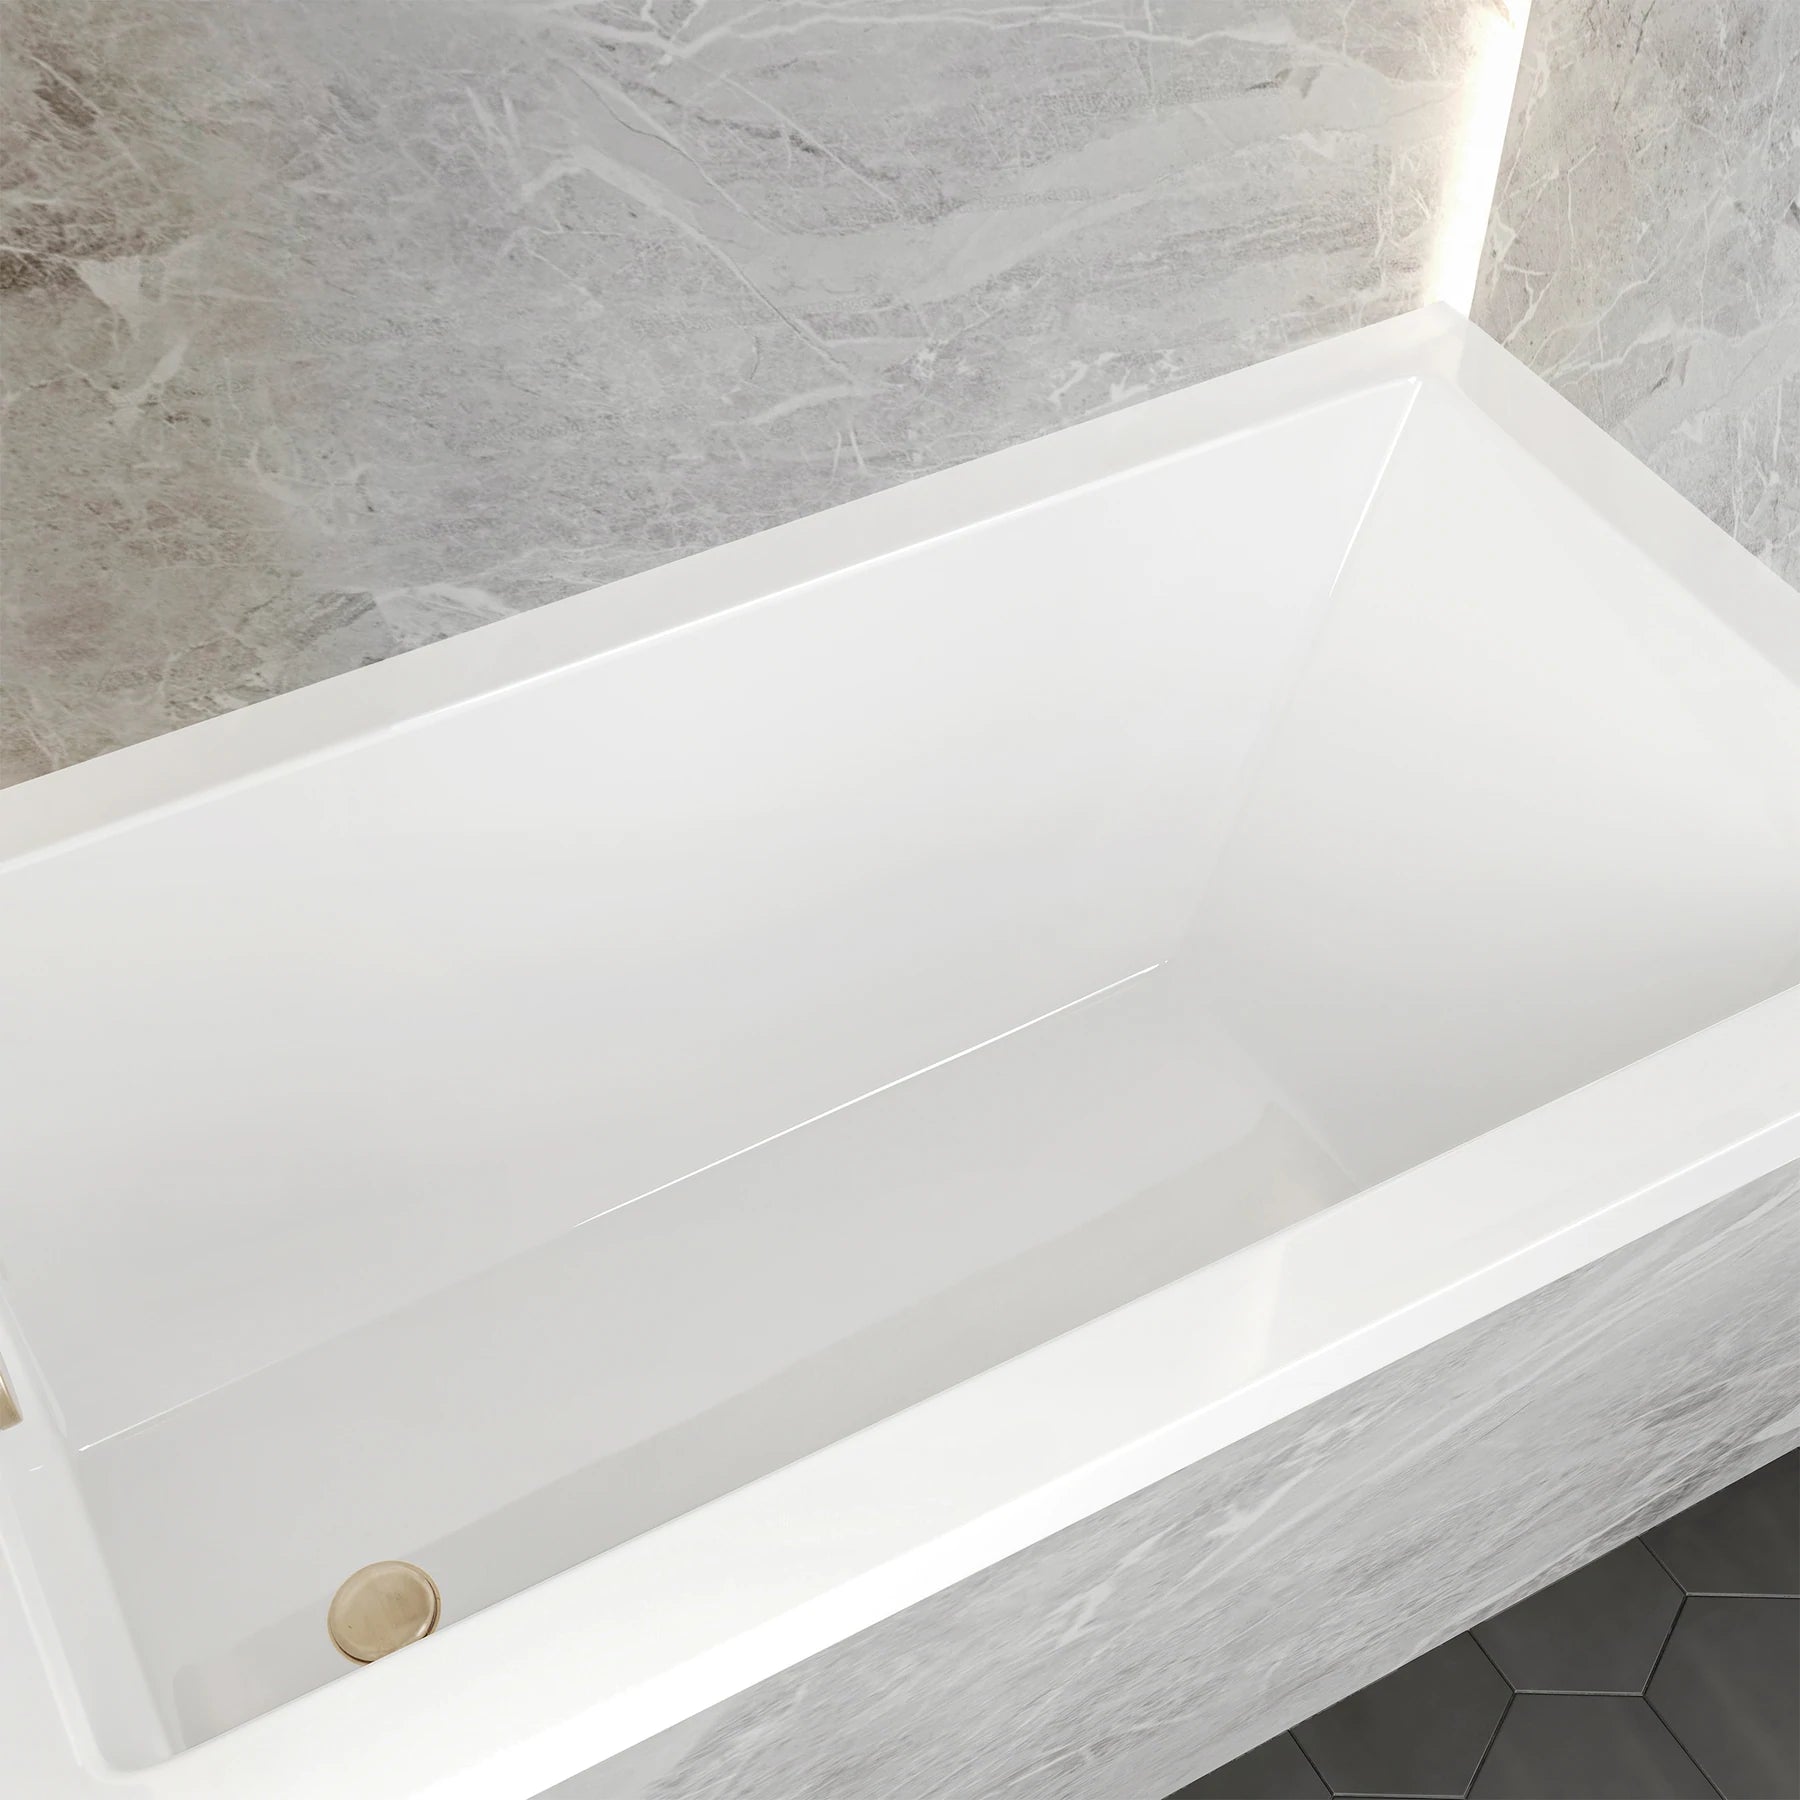 Swiss Madison Voltaire 54 in x 30 in Acrylic Glossy White, Alcove, Integral Left-Hand Drain, Bathtub - SM-AB562